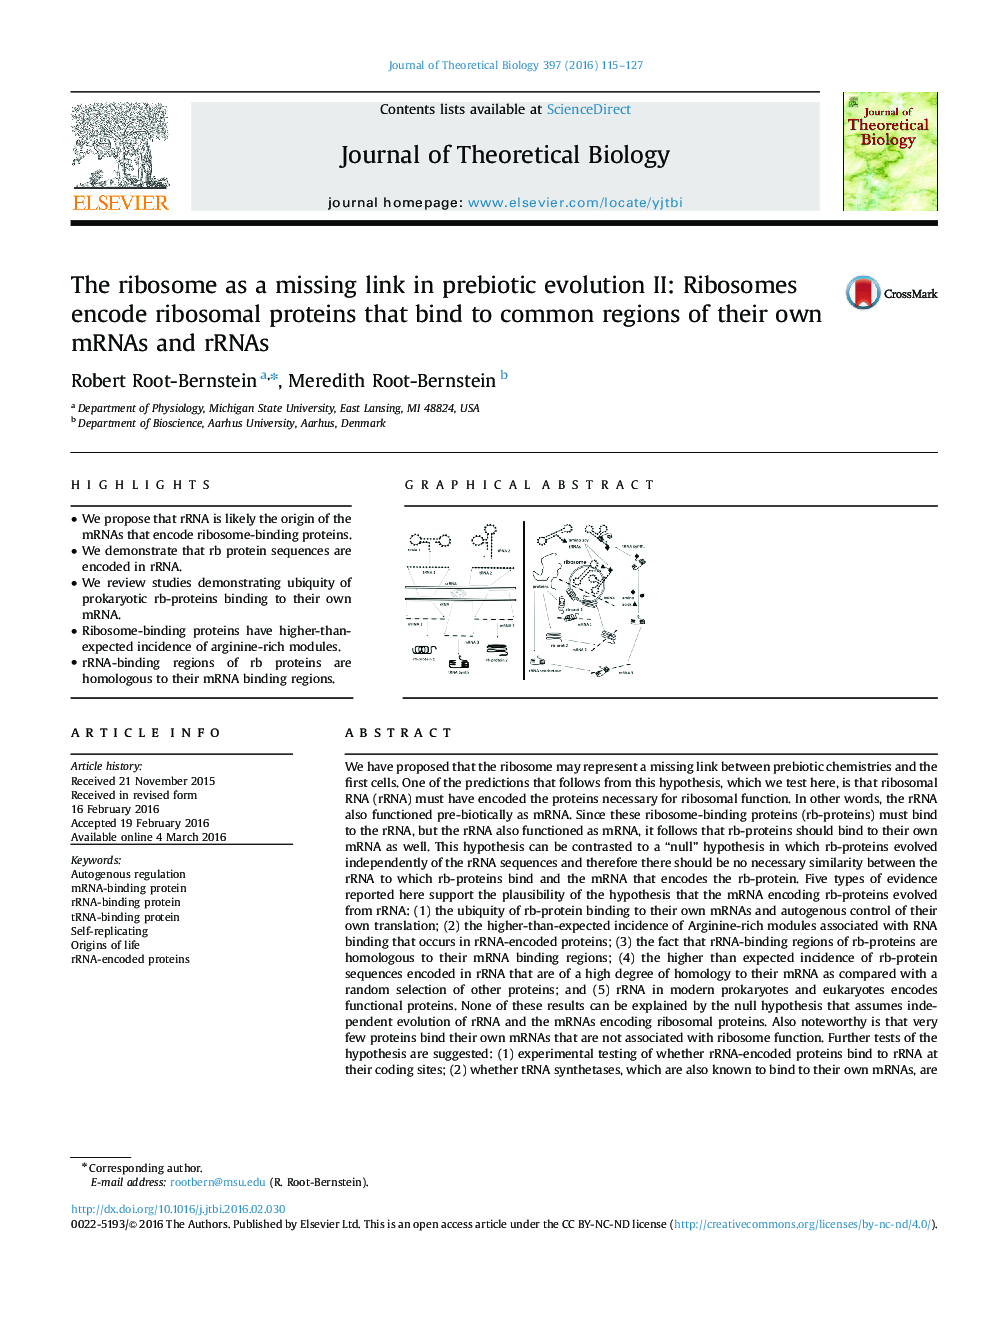 The ribosome as a missing link in prebiotic evolution II: Ribosomes encode ribosomal proteins that bind to common regions of their own mRNAs and rRNAs